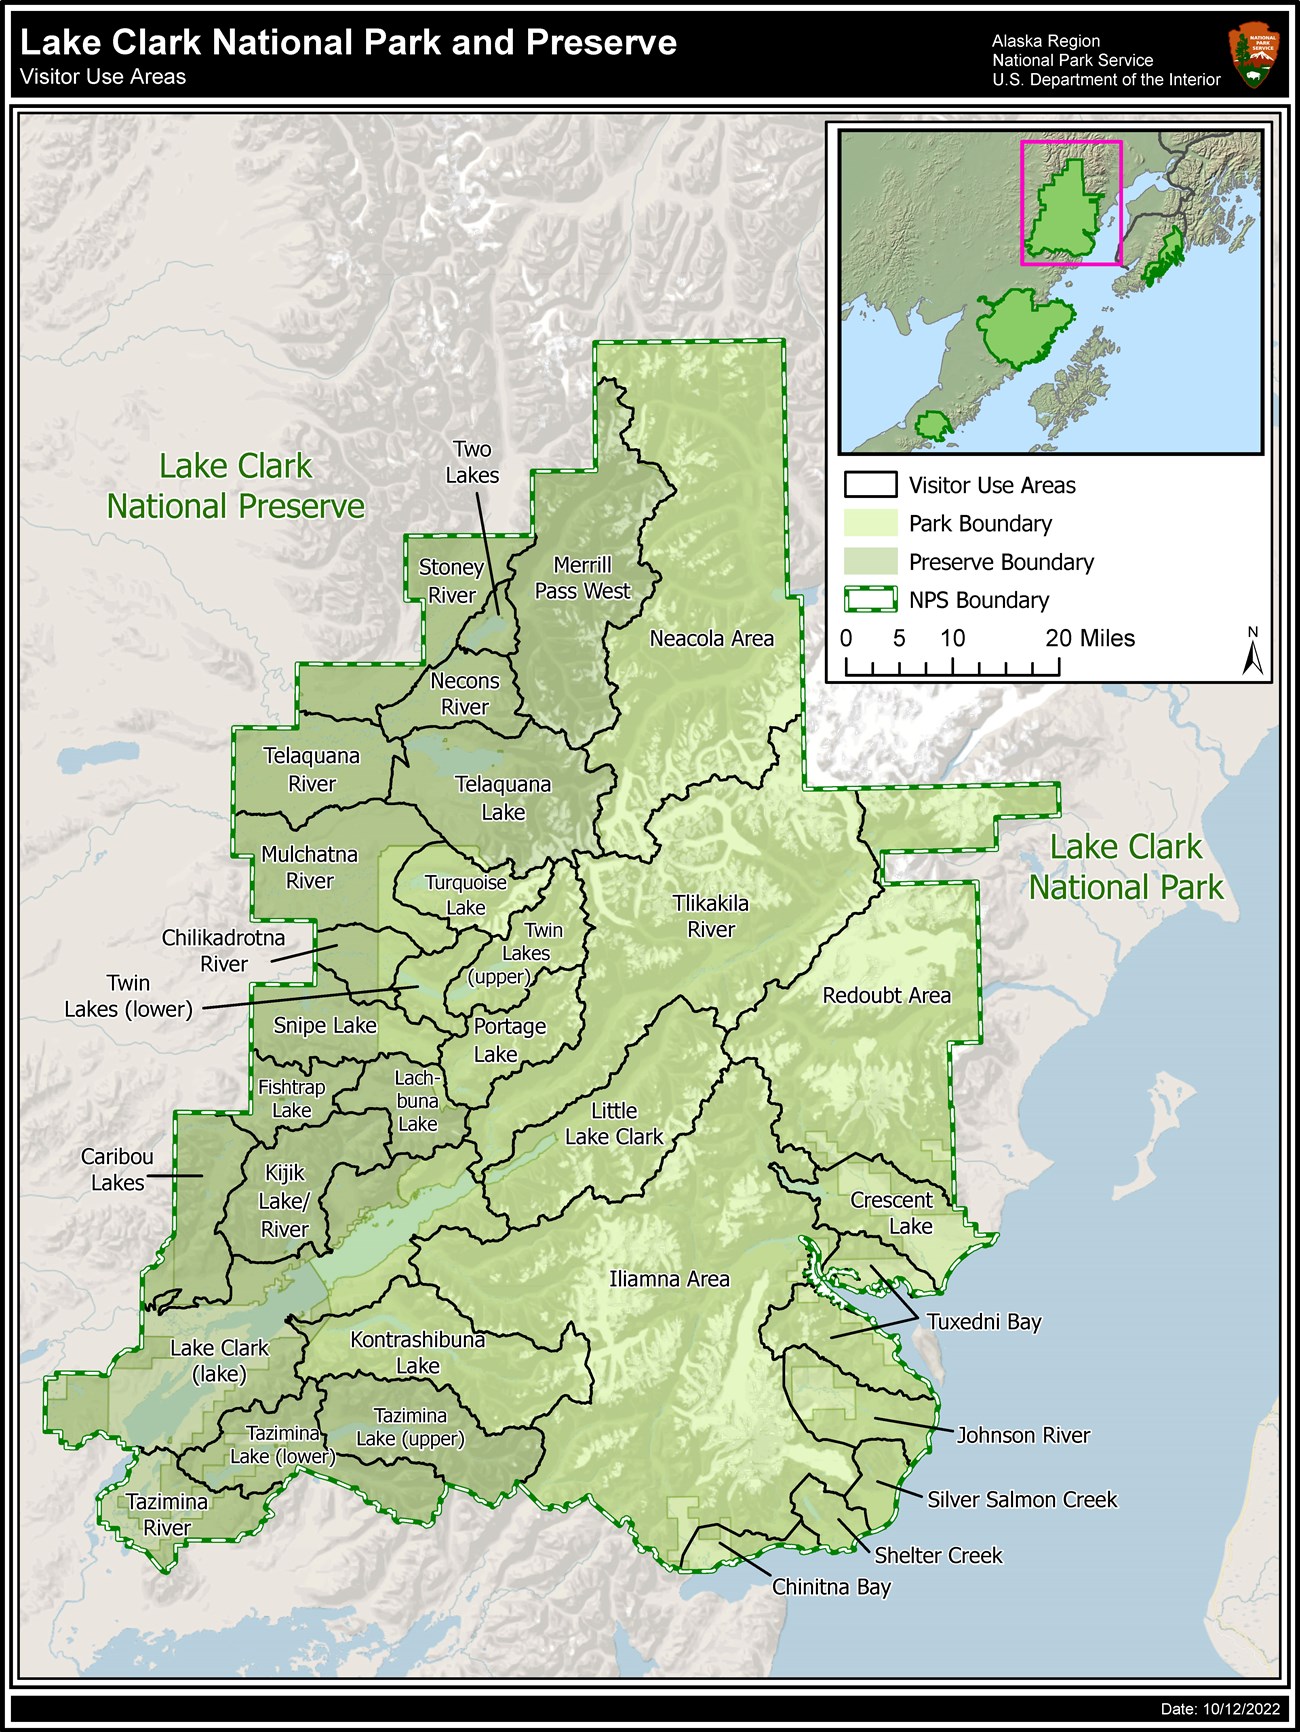 Lake Clark National Park and Preserve Visitor Use Area Map